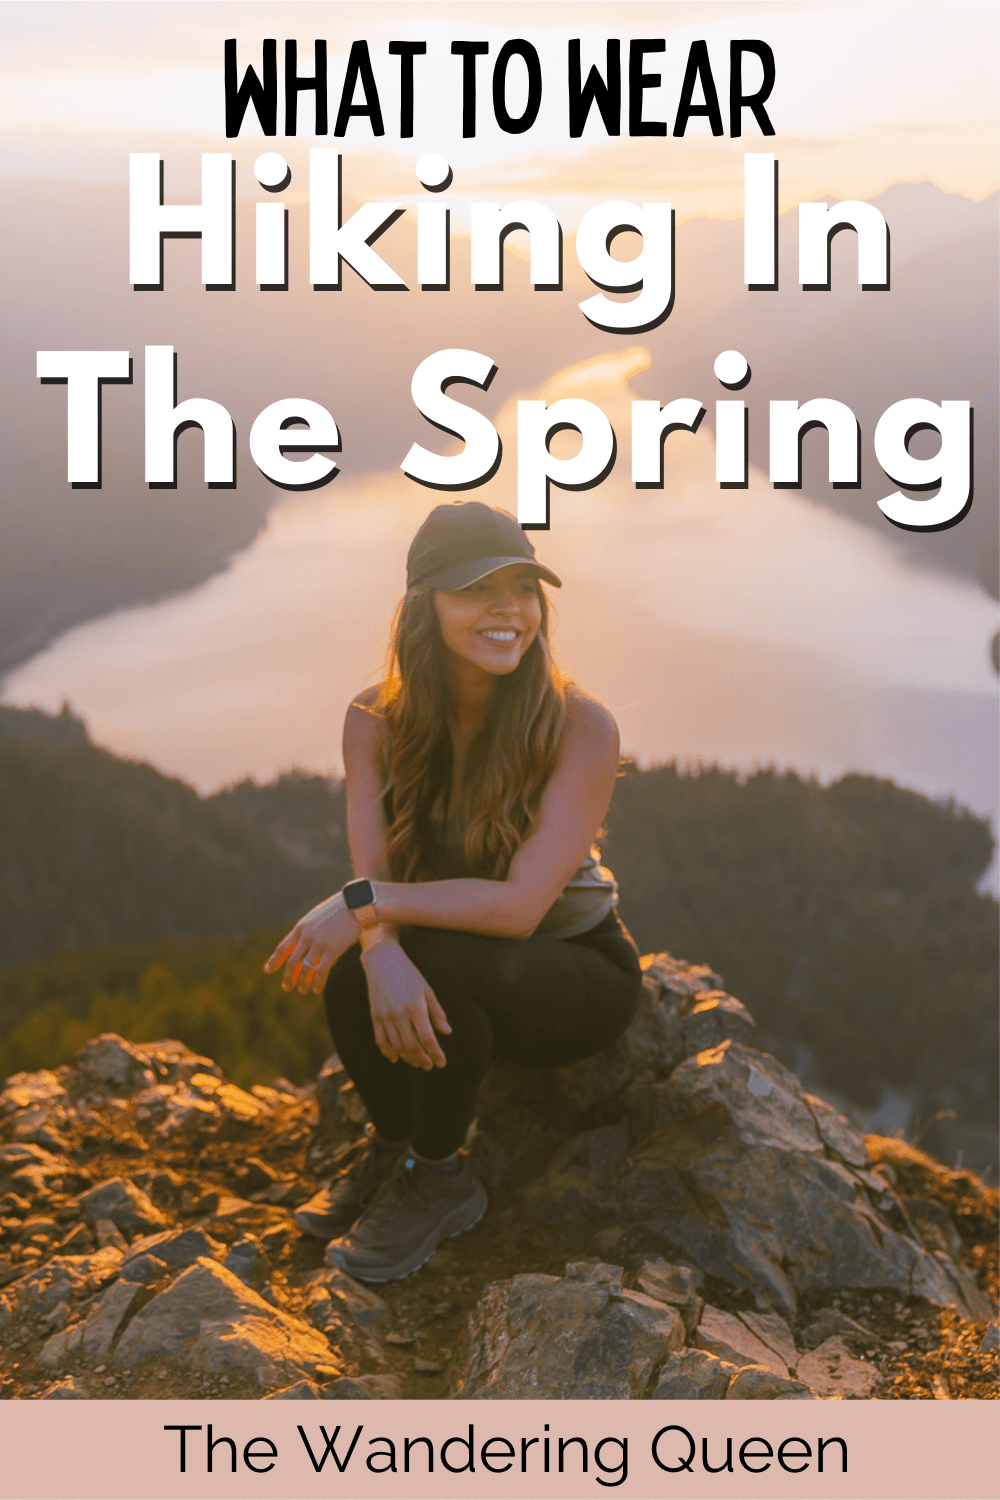 What to Wear Hiking in Colorado